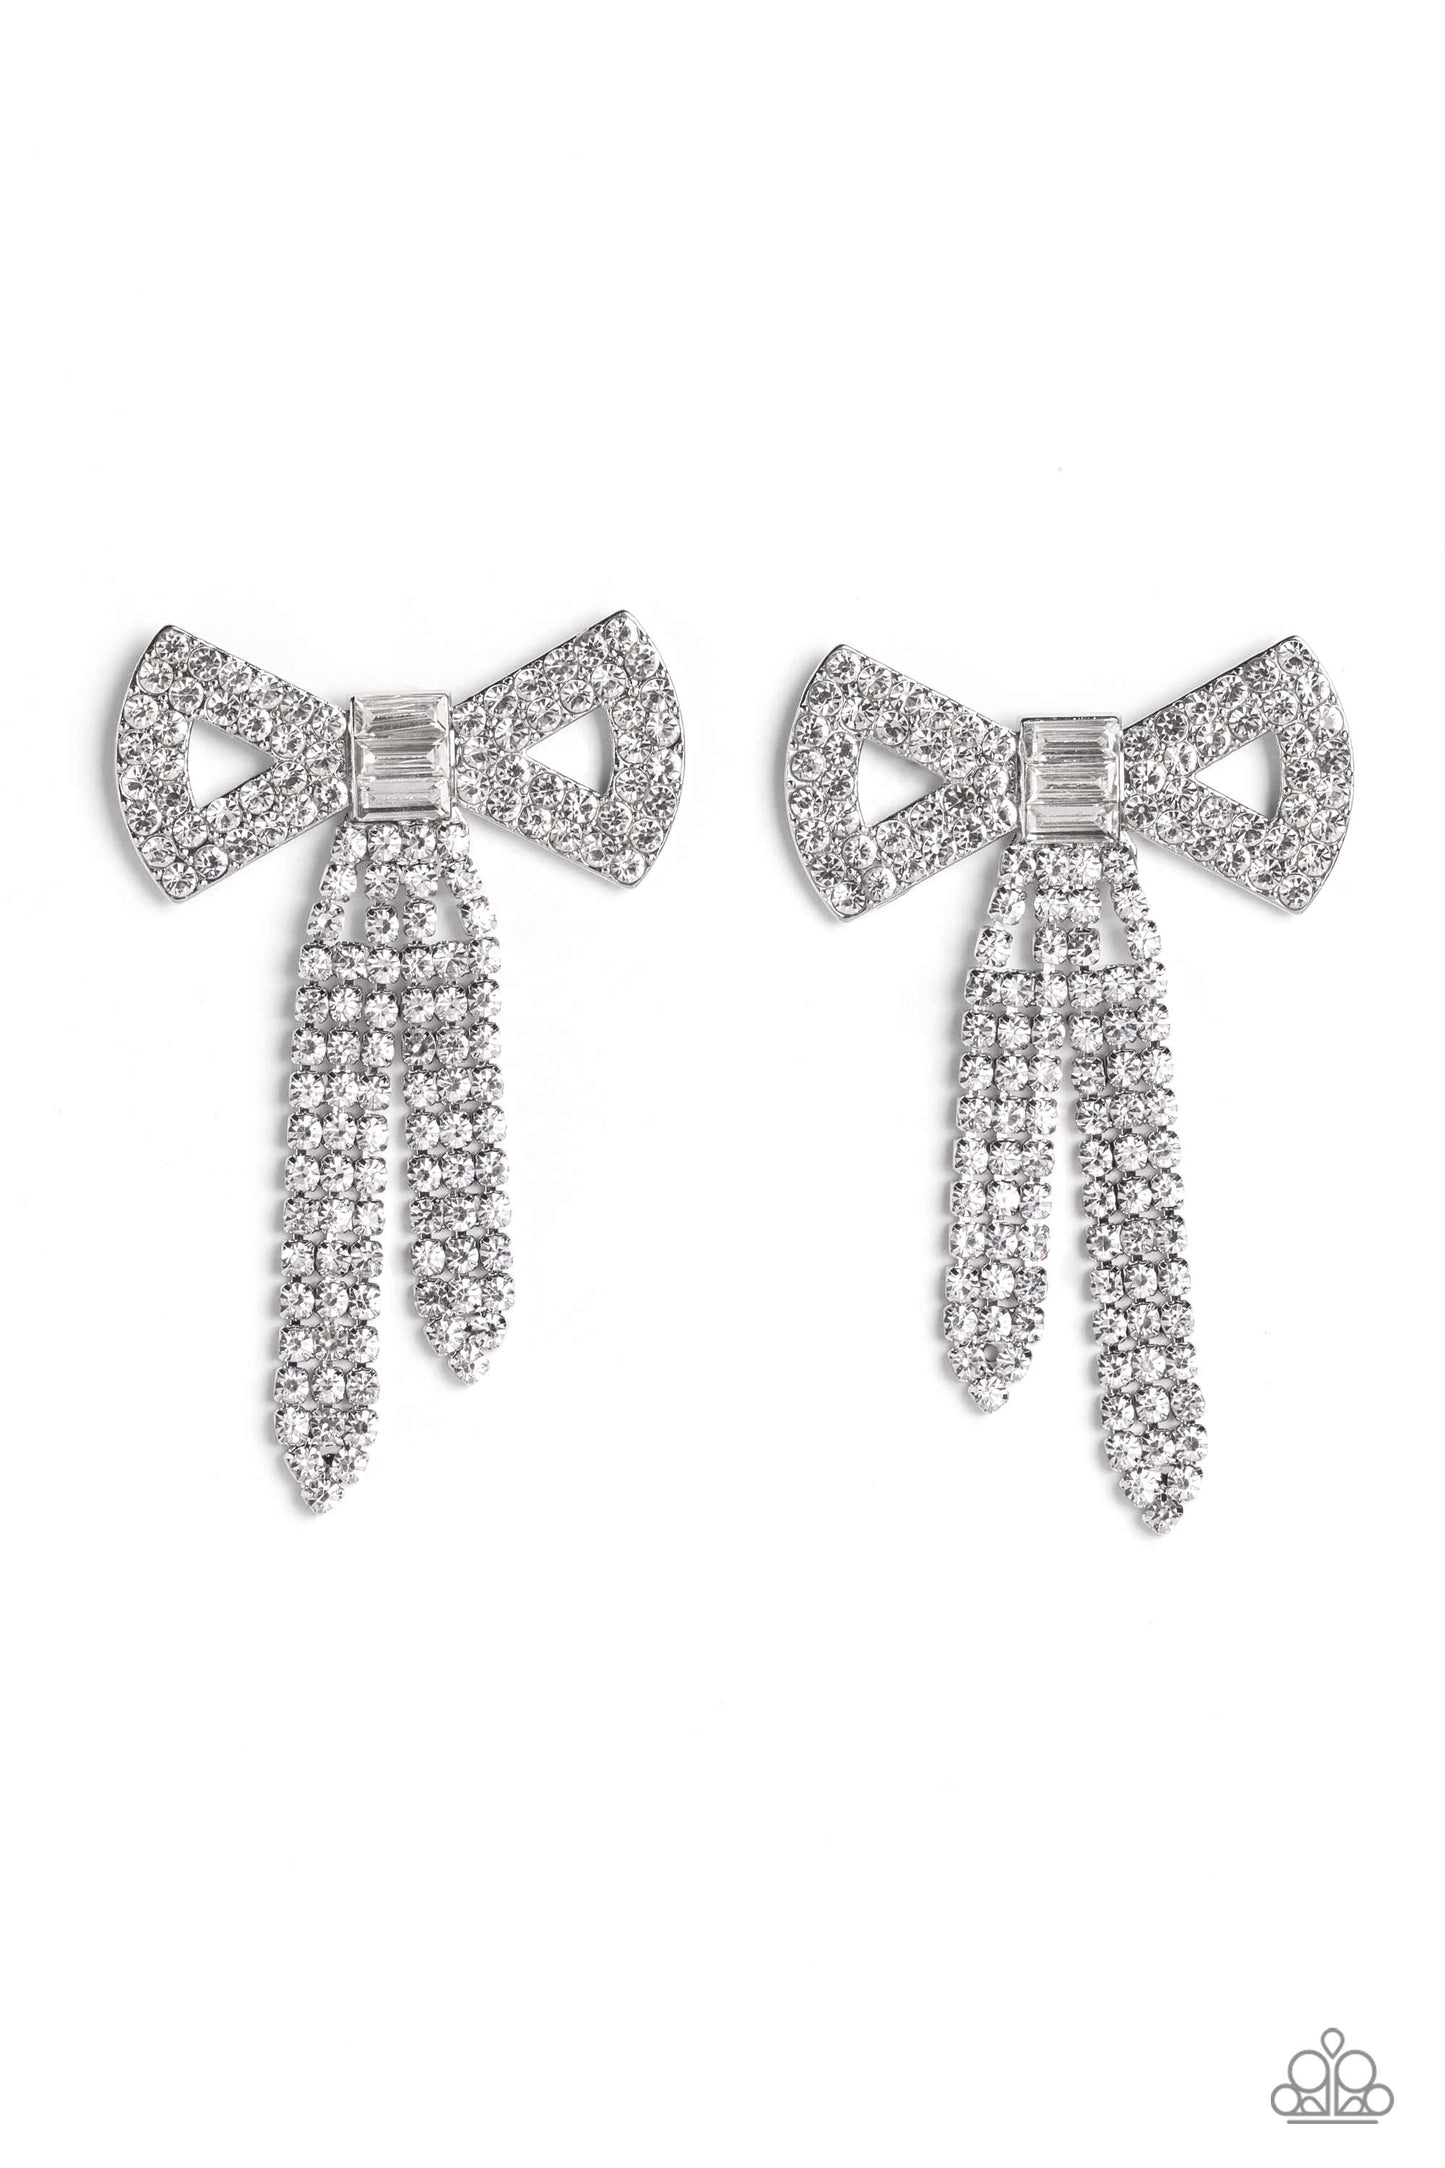 ** Just BOW With It - White Earrings